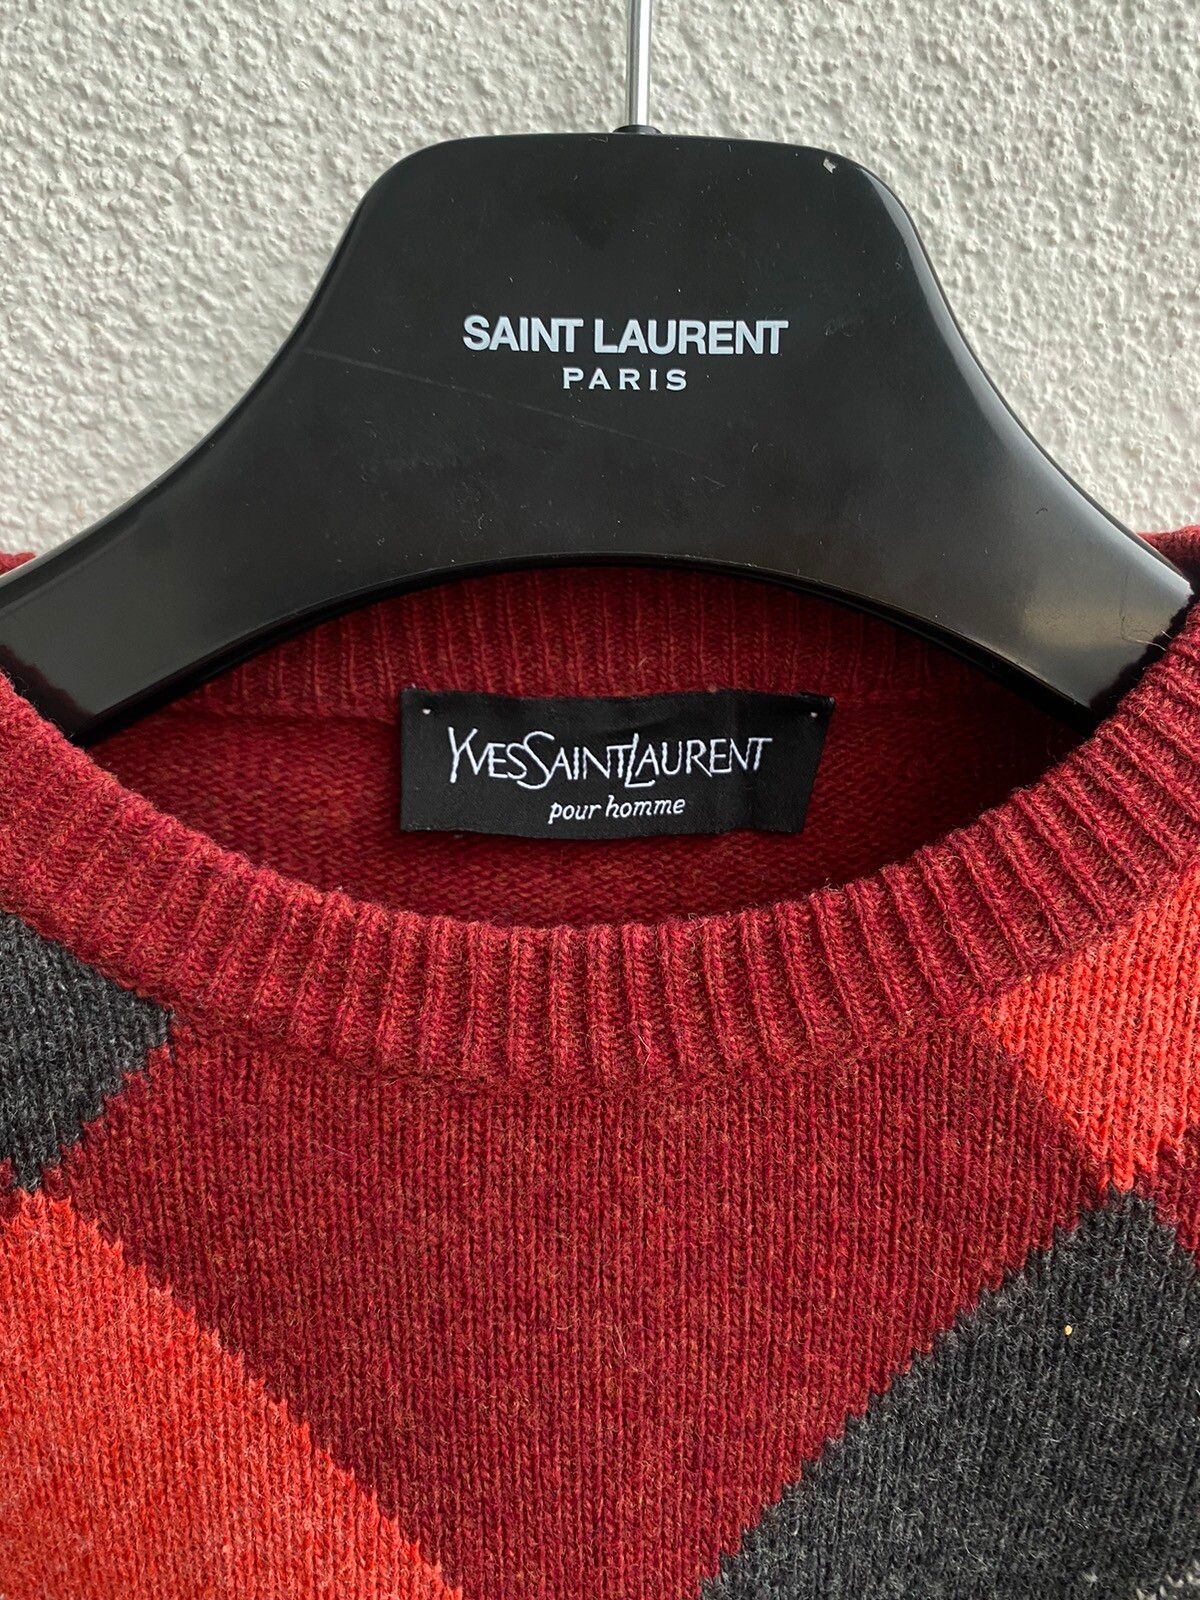 Vintage 🇮🇹italy 90’s YSL Sweater Wool Knit Soft Size US L / EU 52-54 / 3 - 5 Thumbnail